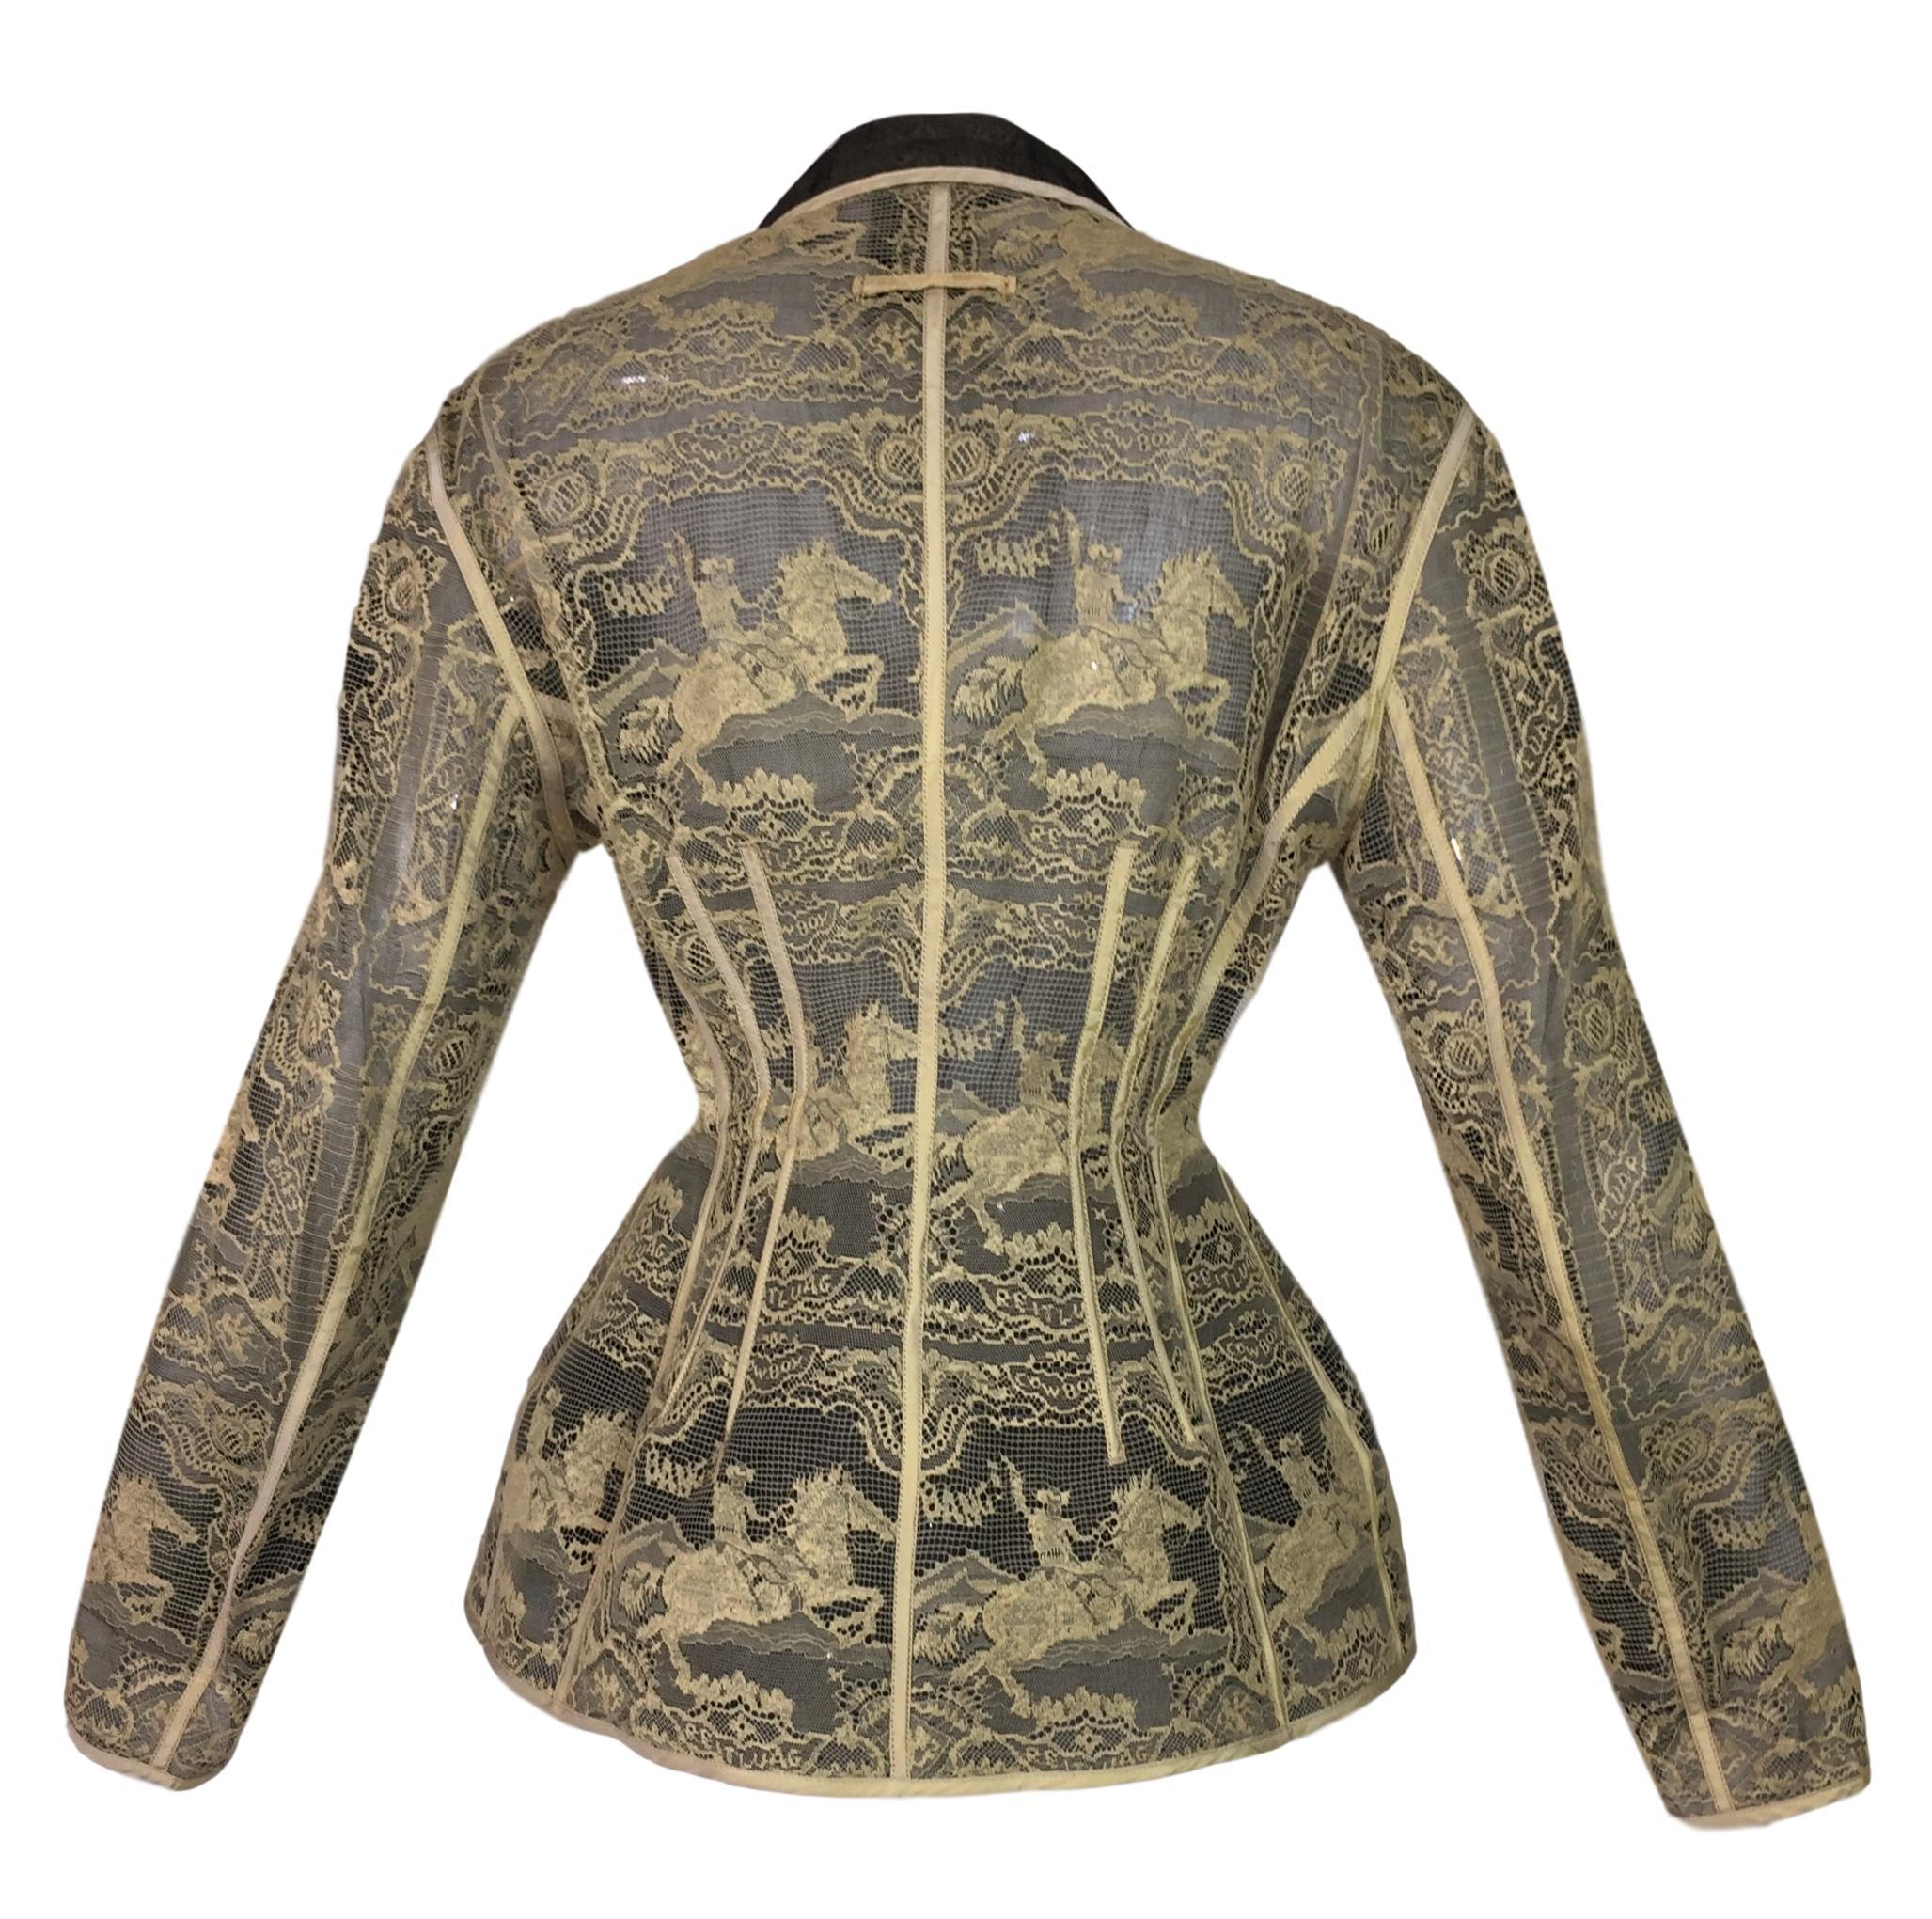 DESIGNER: S/S 1988 Jean Paul Gaultier- this is a very rare museum worthy piece! It is a sheer black under layer with a spectacular lace top layer designed with a western cowboy pattern. The waist is cinched with a thick structured fabric layer at